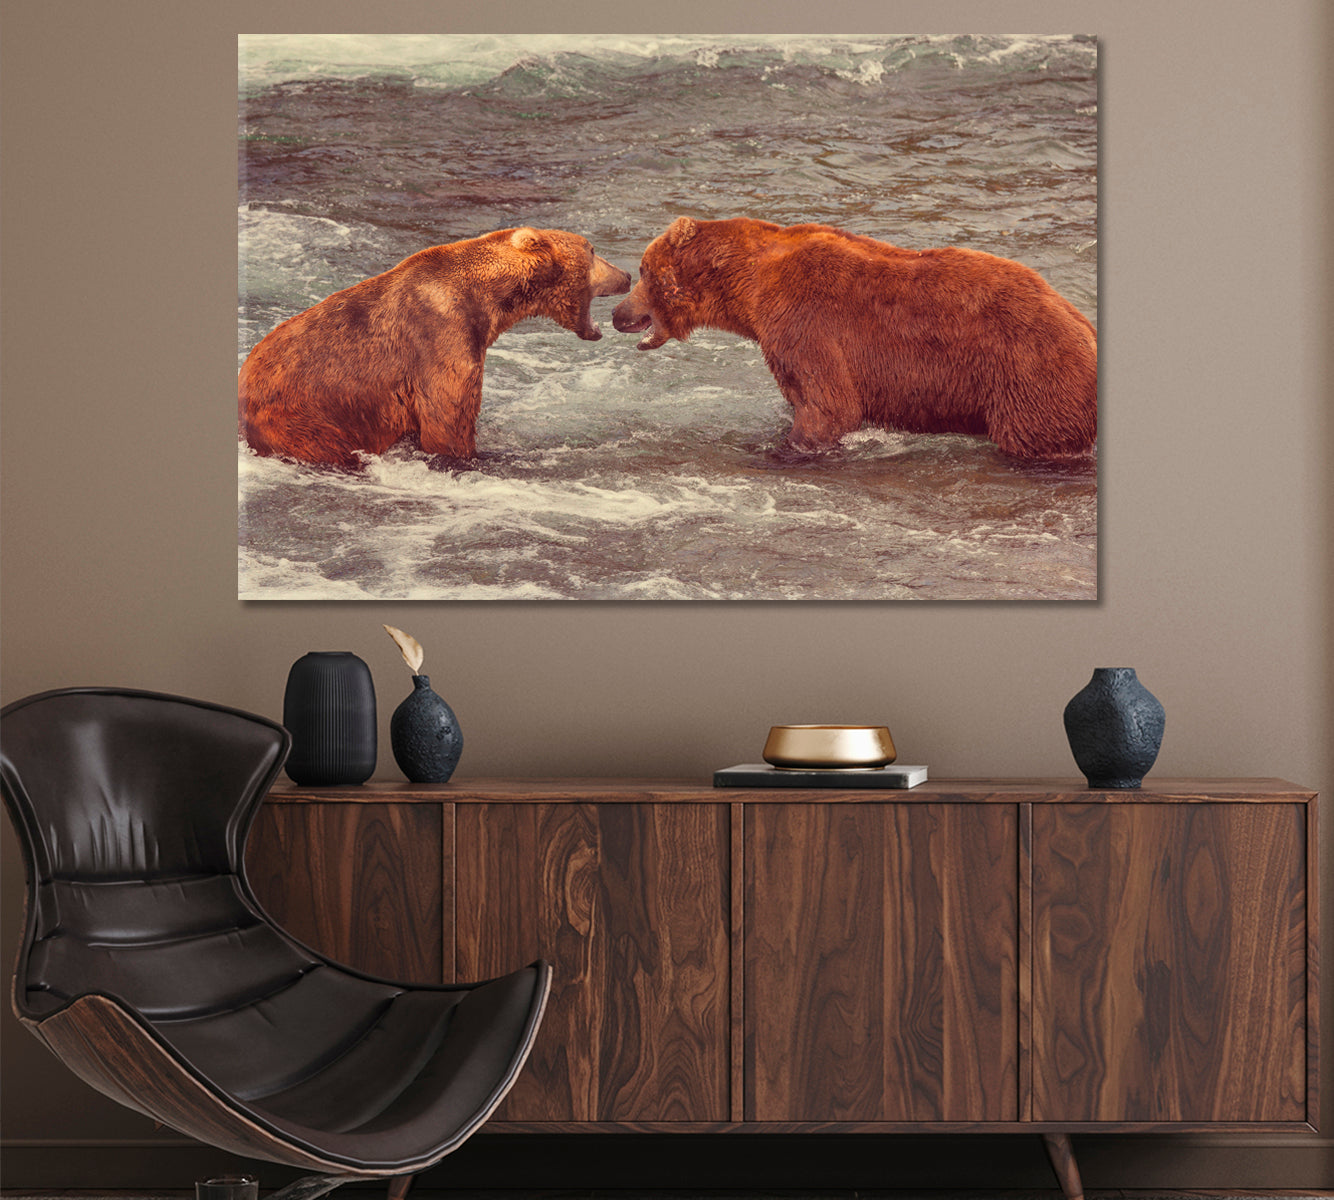 Grizzly Bears Hunting Salmon at Brooks Falls Alaska Canvas Print ArtLexy 1 Panel 24"x16" inches 